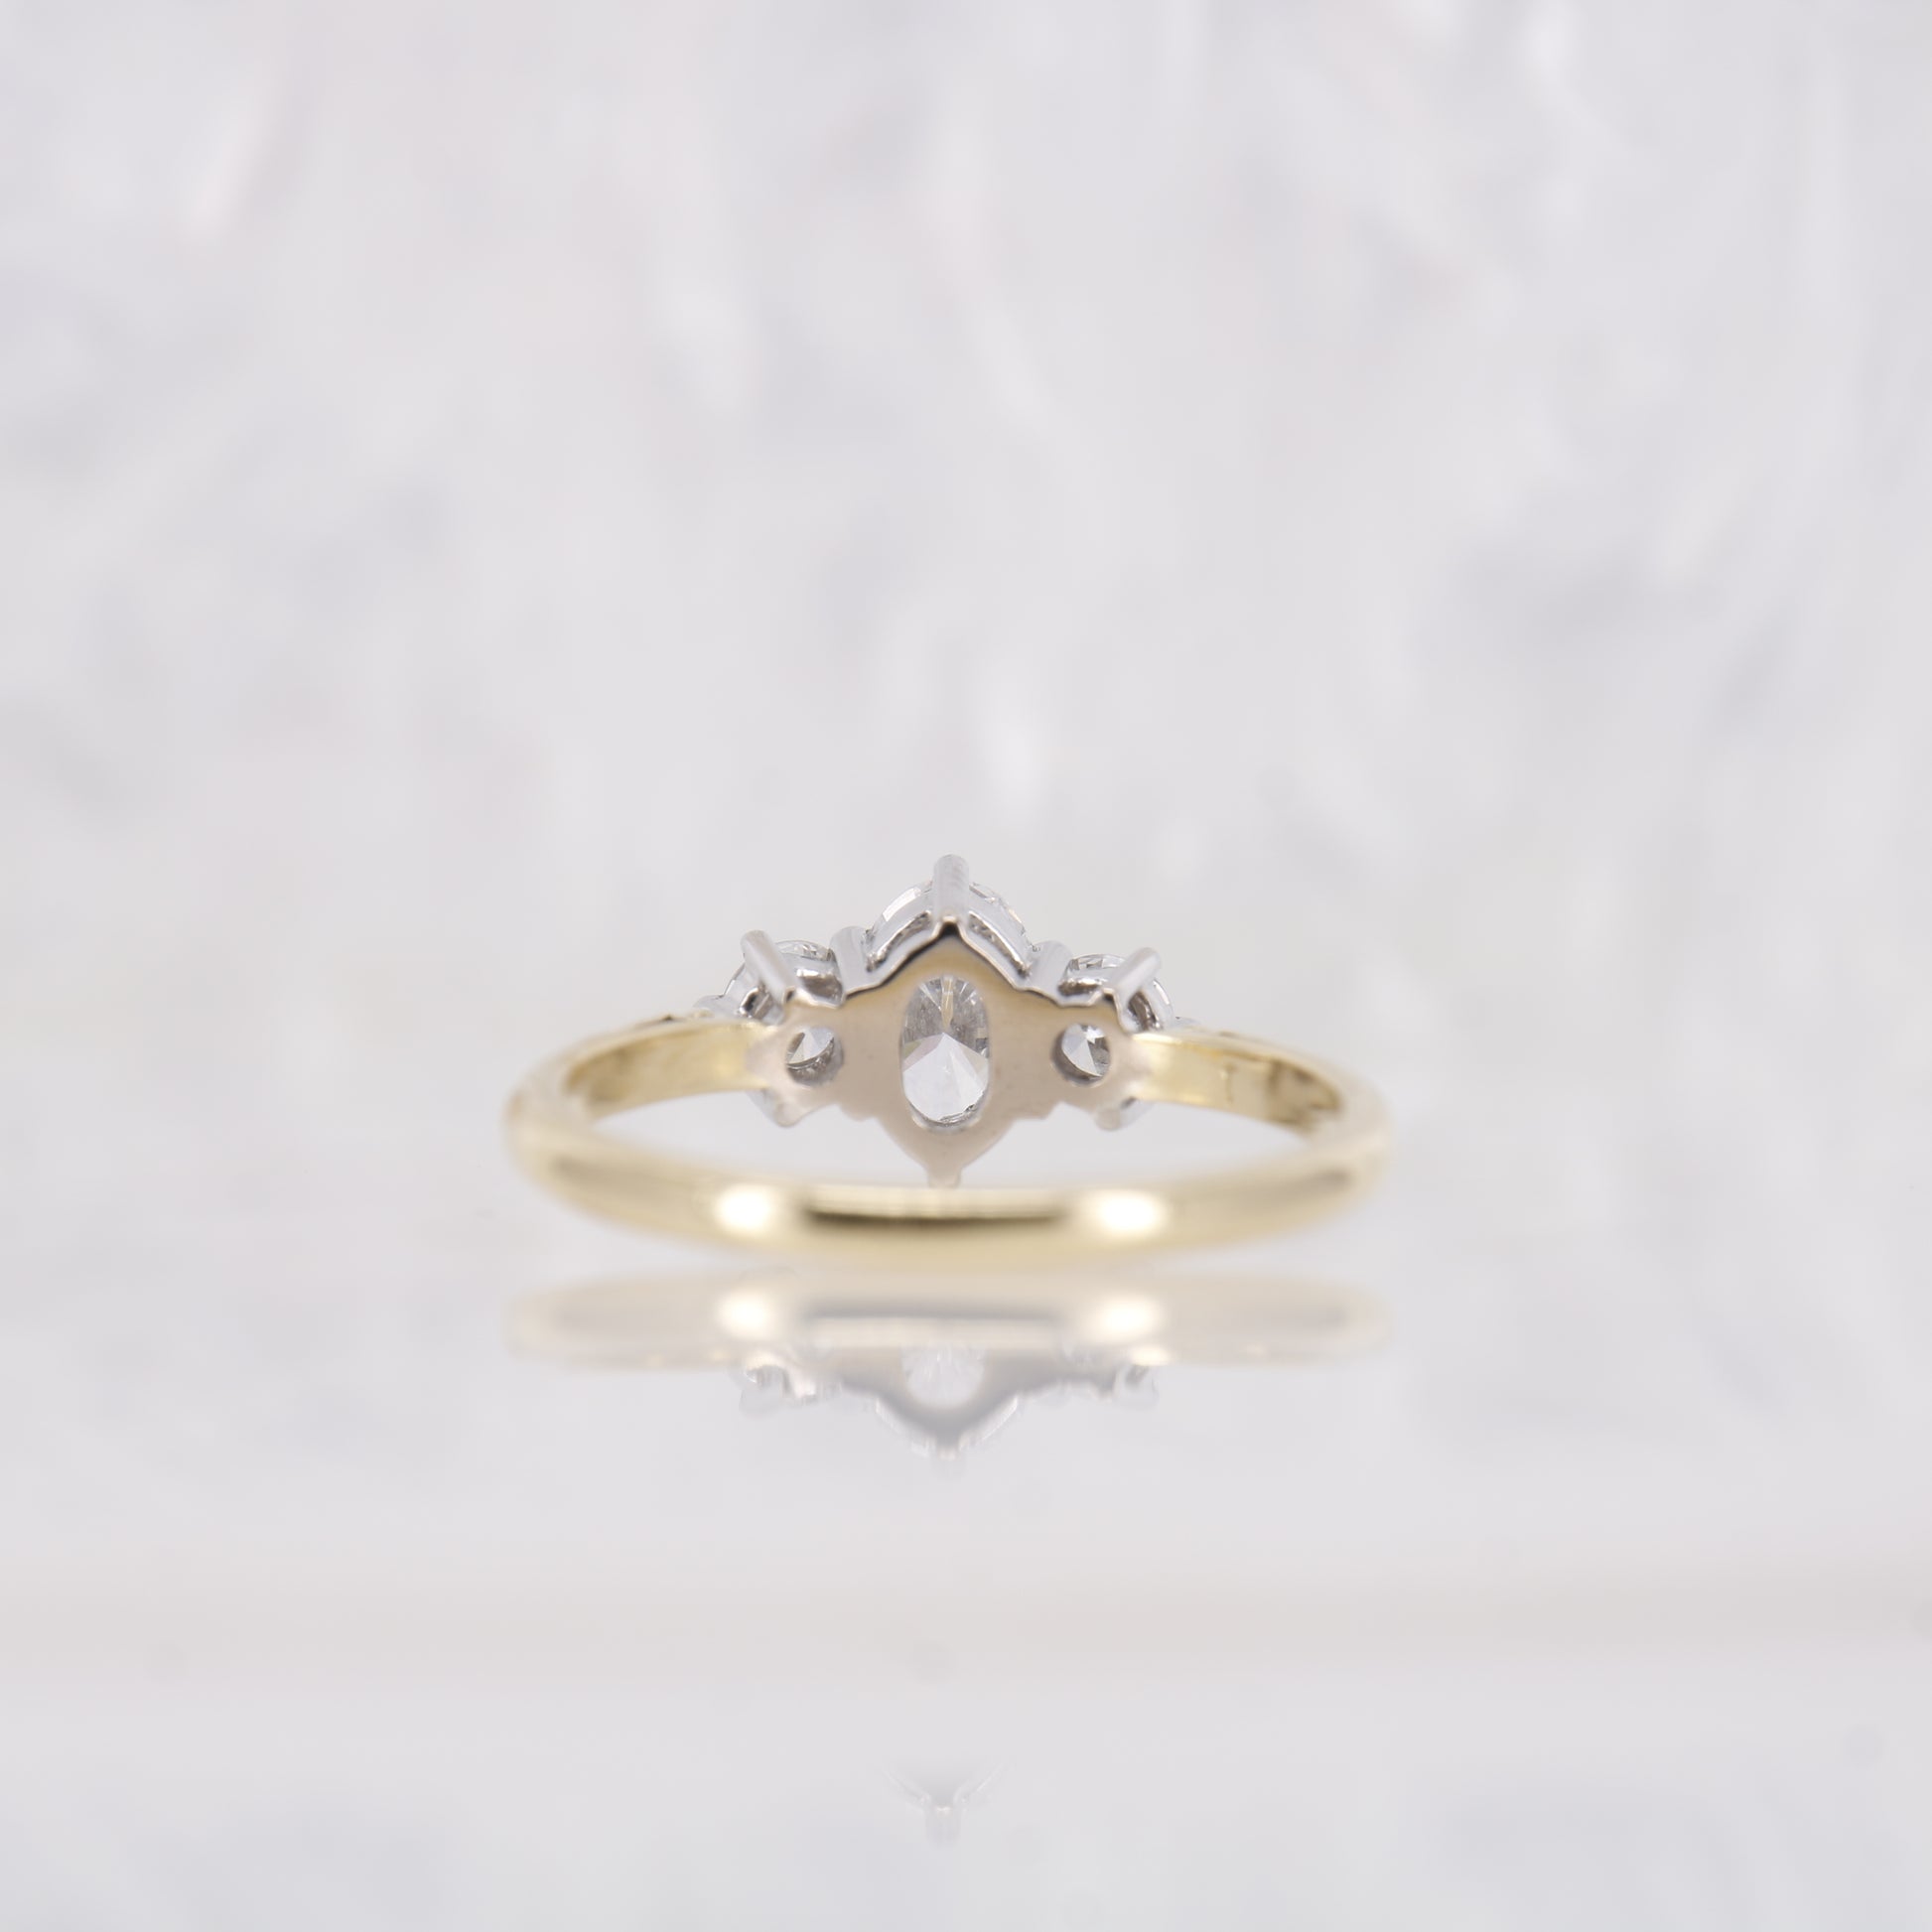 18ct yellow gold oval diamond engagement ring. Three stone oval diamond engagement ring. 